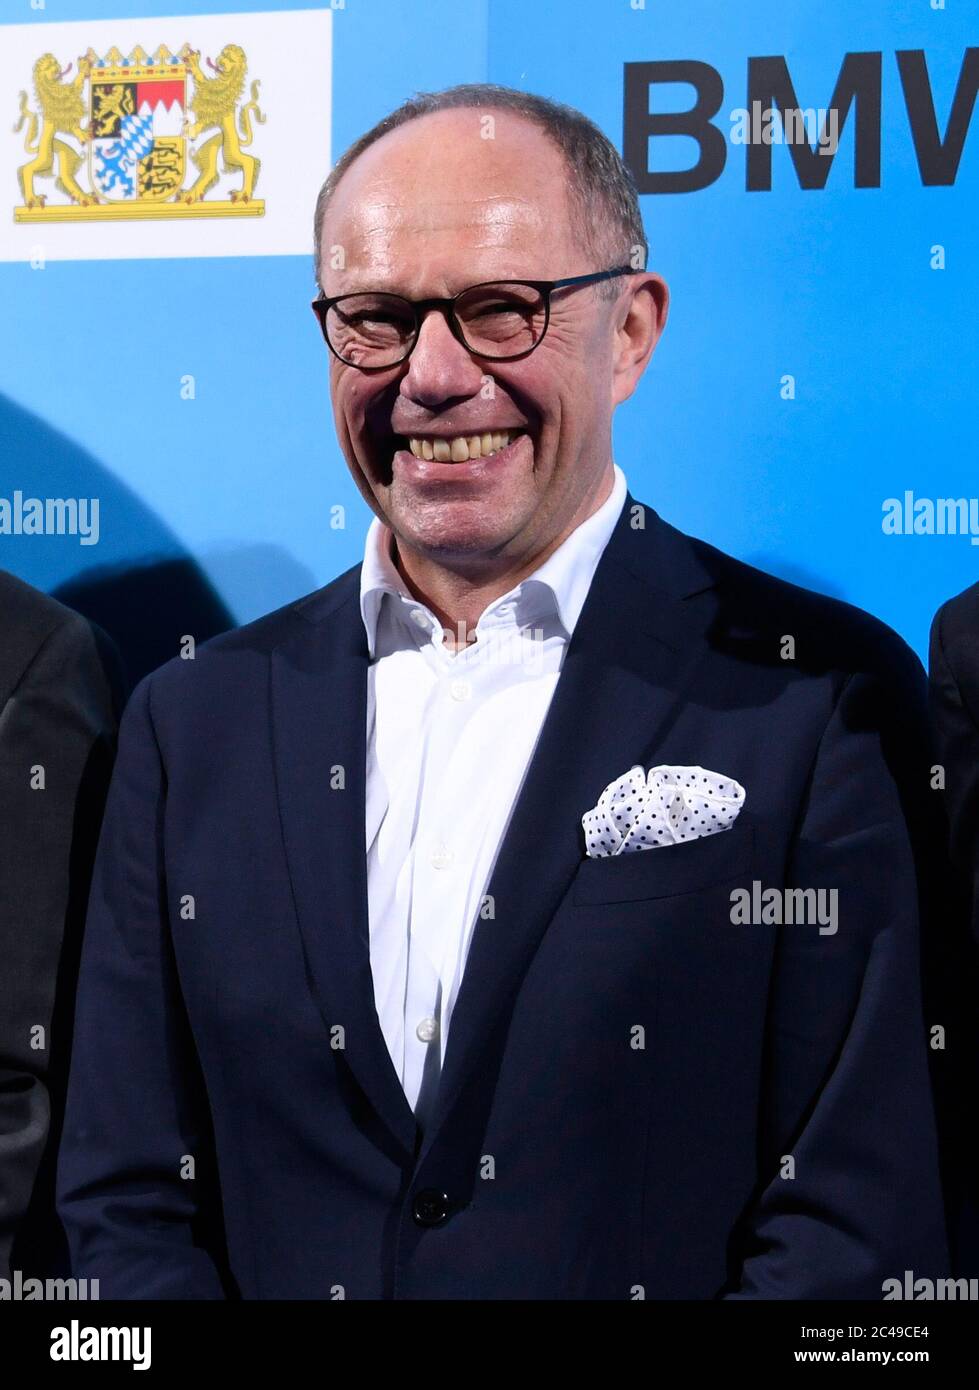 Munich, Germany. 21st July, 2018. Frank Dassler, former board member of  Adidas, is standing at the presentation of the Bavarian Sports Award at the  BMW Welt in Munich. The grandson of Puma